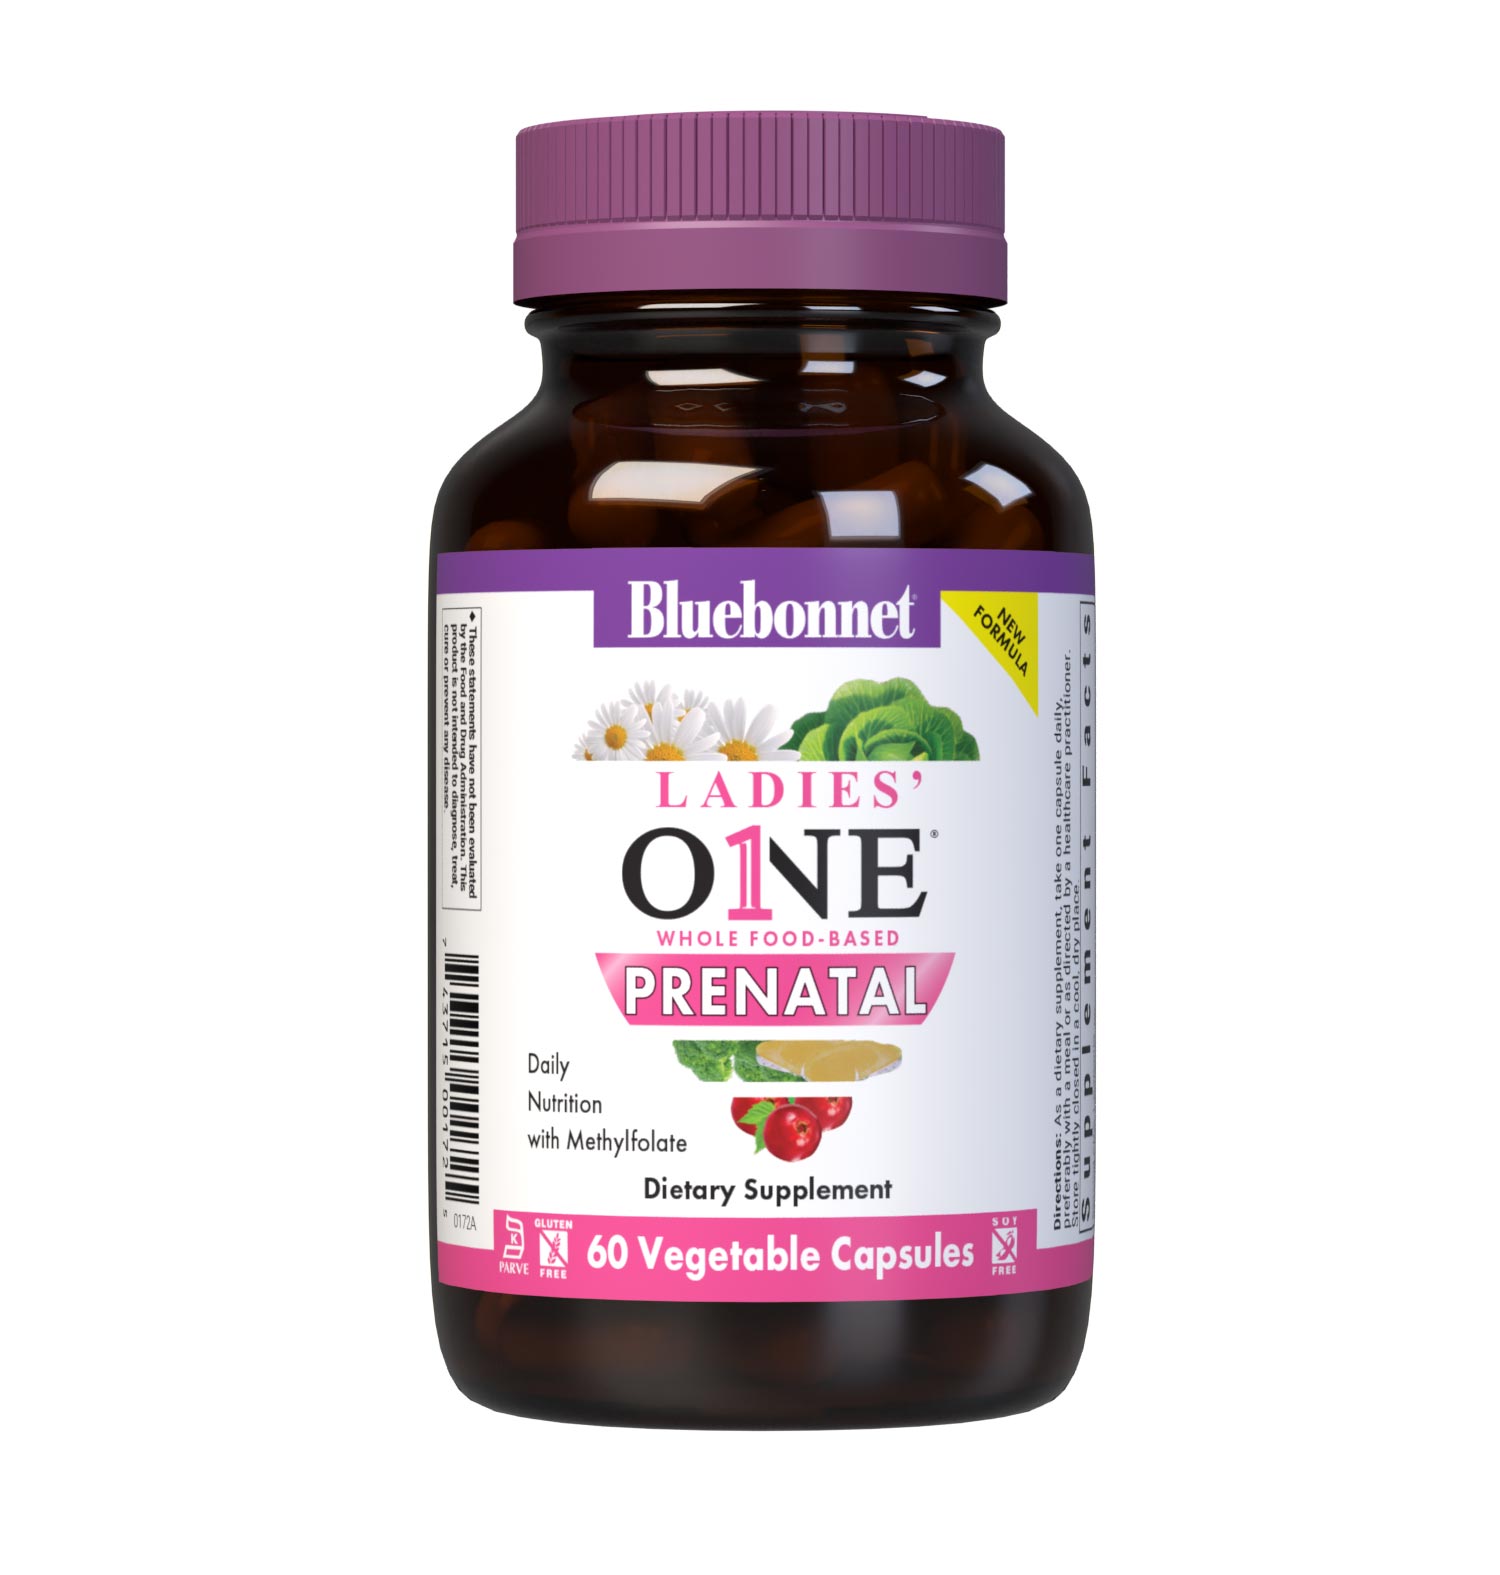 Bluebonnet's Ladies One prenatal whole food-based multiple 30 vegetable capsules is formulated with highly bioavailable non-GMO ingredients such as active coenzyme forms of B vitamins, vitamin K2, vitamin E from sunflower along with sustainably harvested and wildcrafted herbs, superfruits and vegetables. #size_60 count